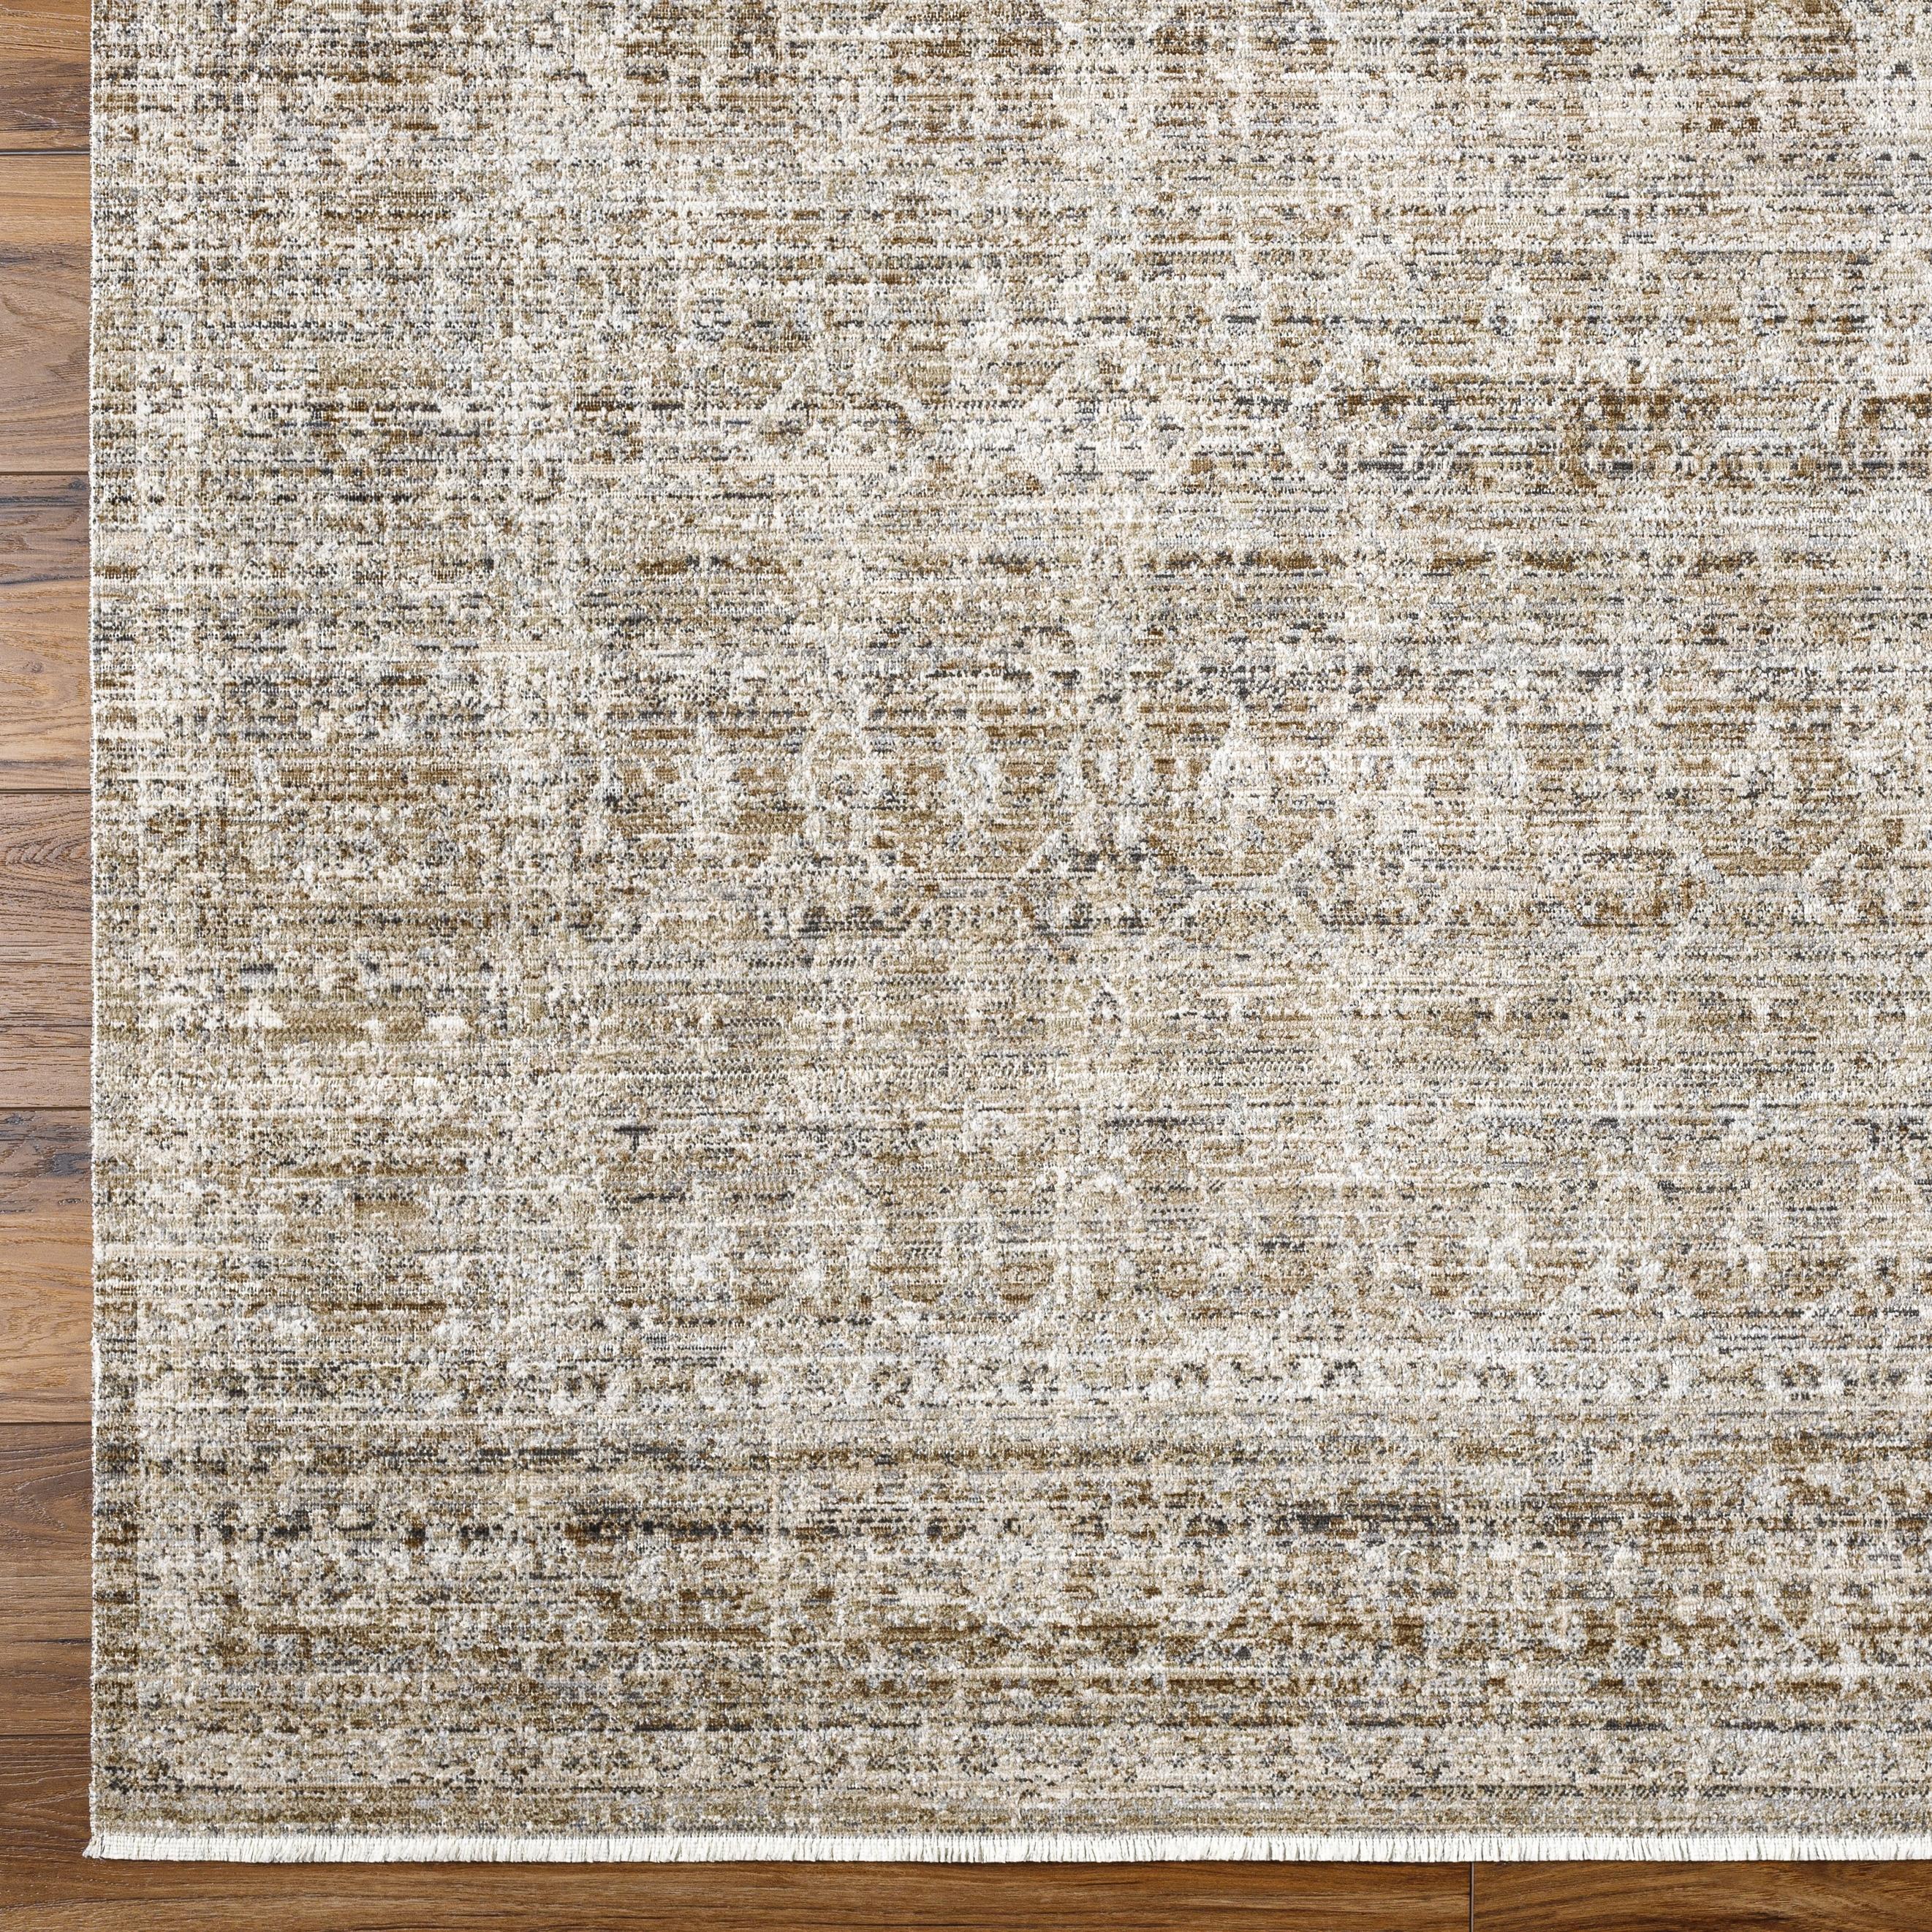 This exquisite Margaret area rug is the perfect addition to any home. The special collaboration piece from Becki Owens x Surya brings together beautiful vintage inspired style and modern craftsmanship. Amethyst Home provides interior design, new home construction design consulting, vintage area rugs, and lighting in the Calabasas metro area.